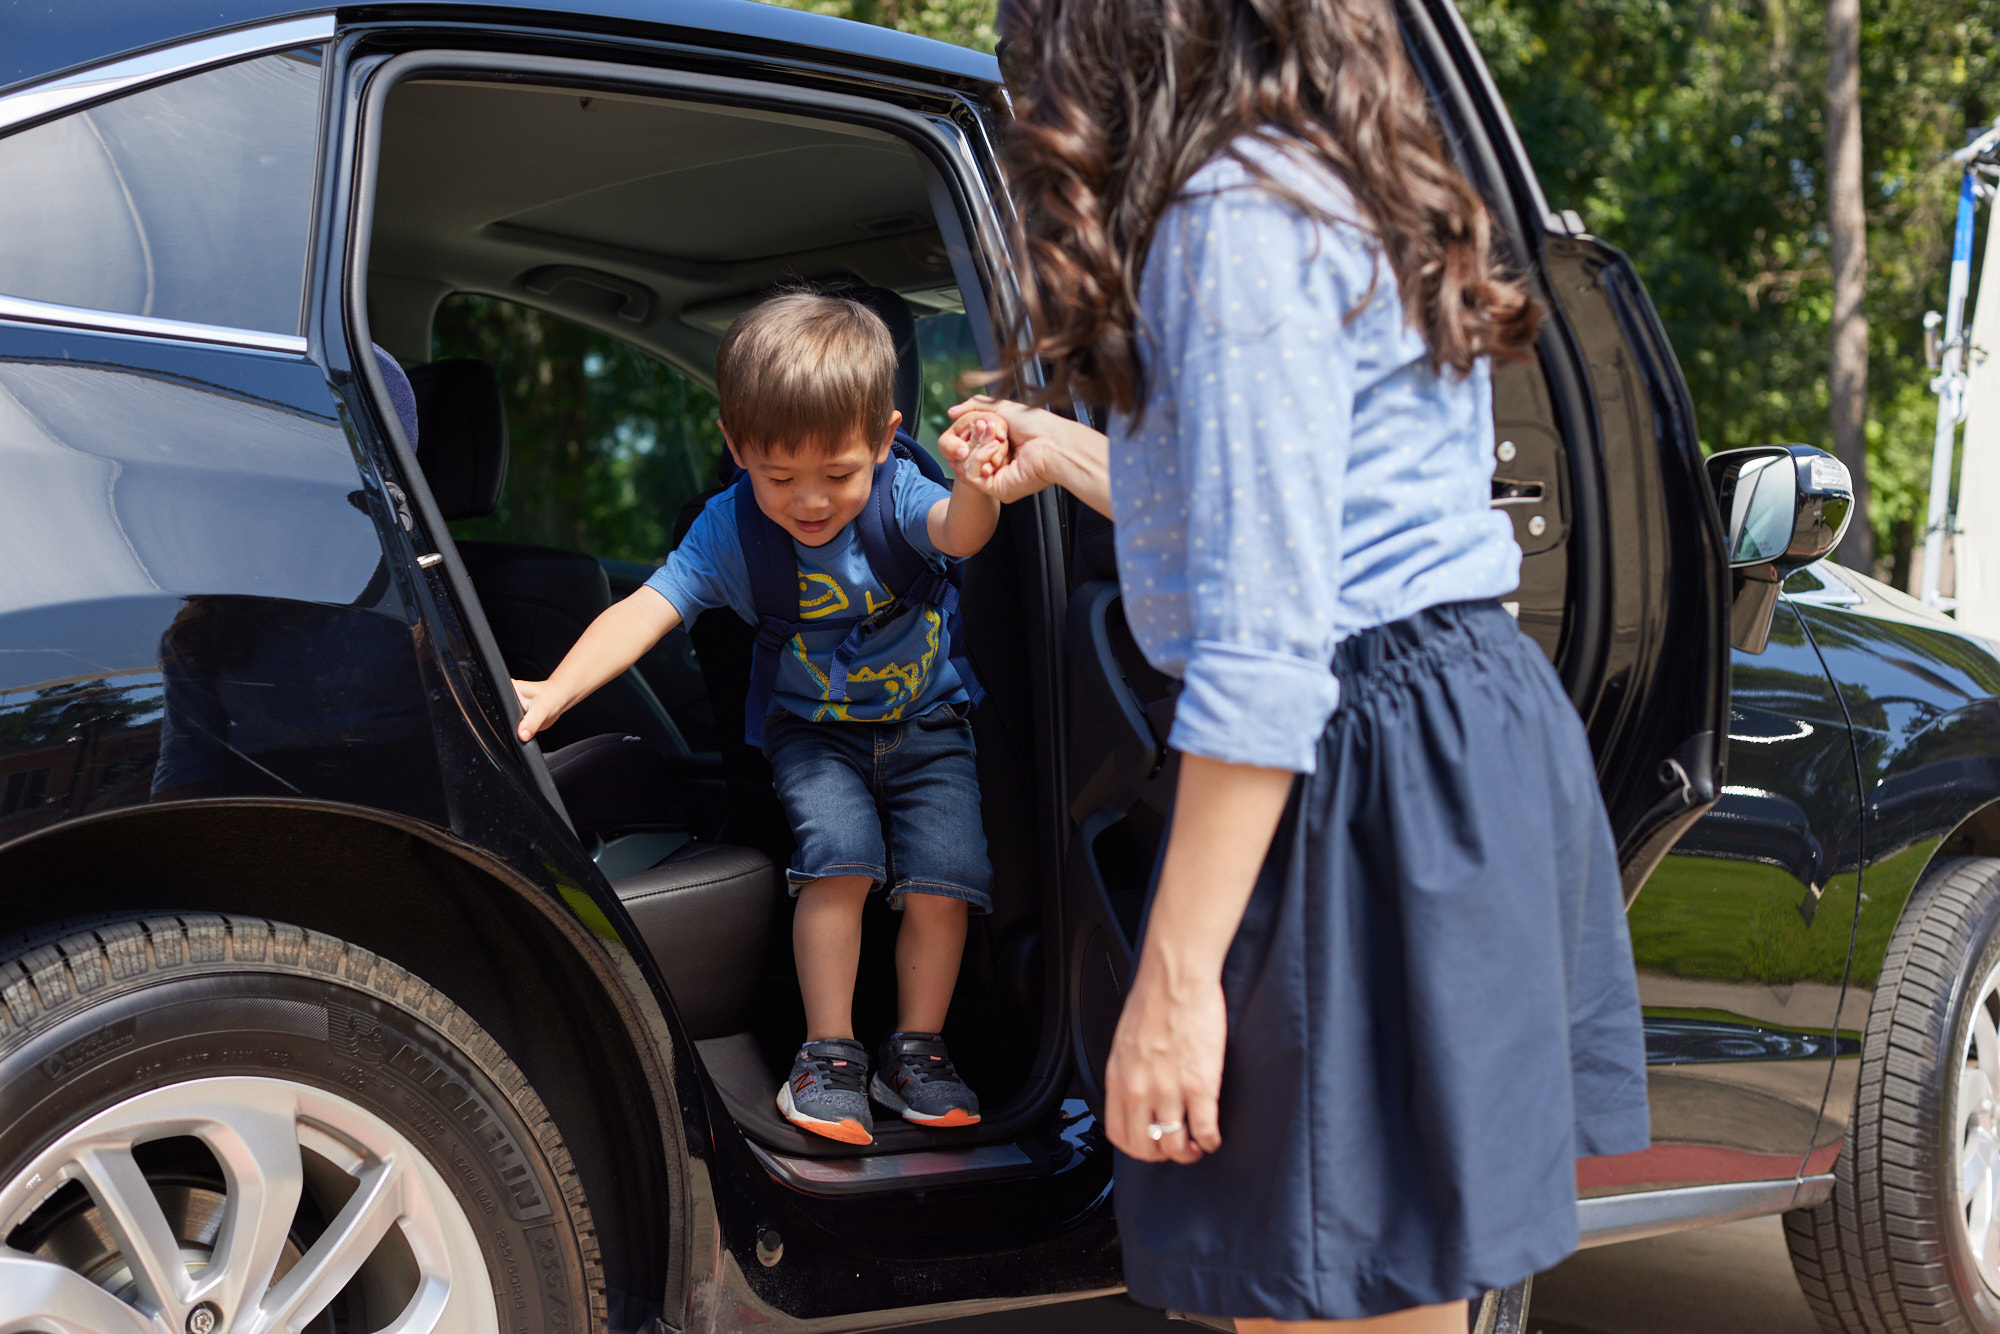 Keep On Rollin' Back To School With Expert Auto Service